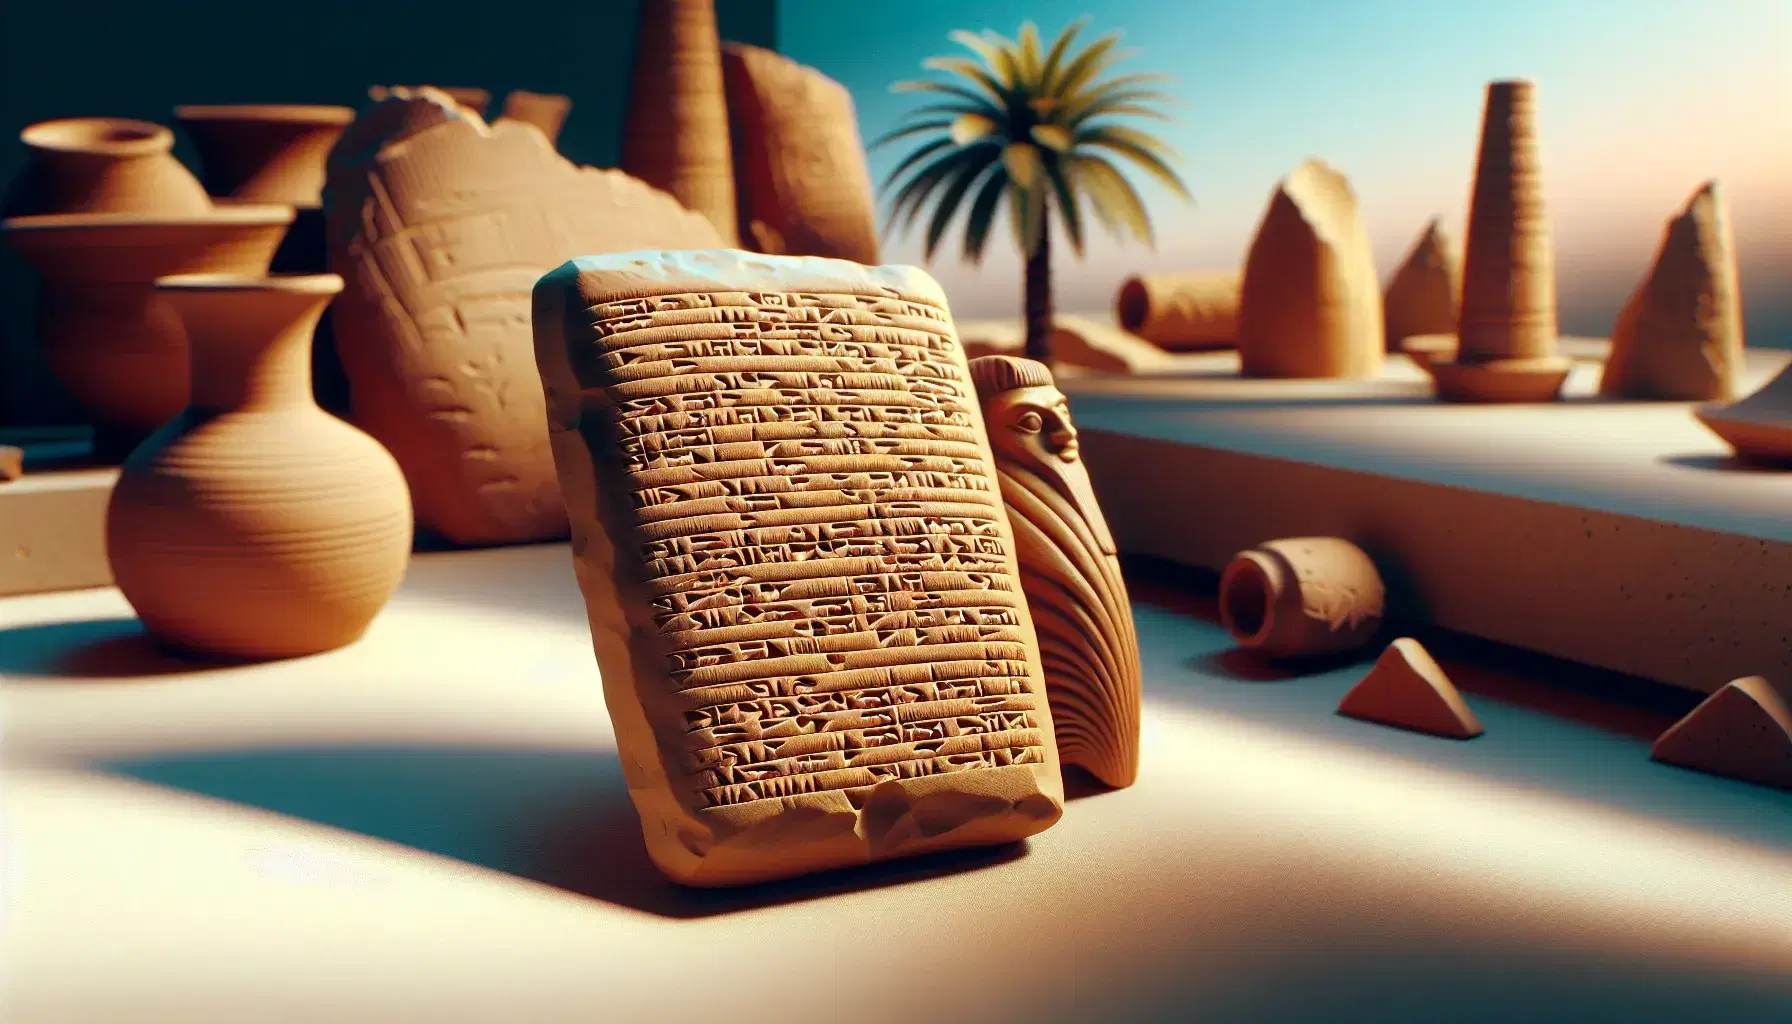 Clay tablet with cuneiform incisions on a background of terracotta fragments and bronze statuette of a Mesopotamian deity, under a palm tree.